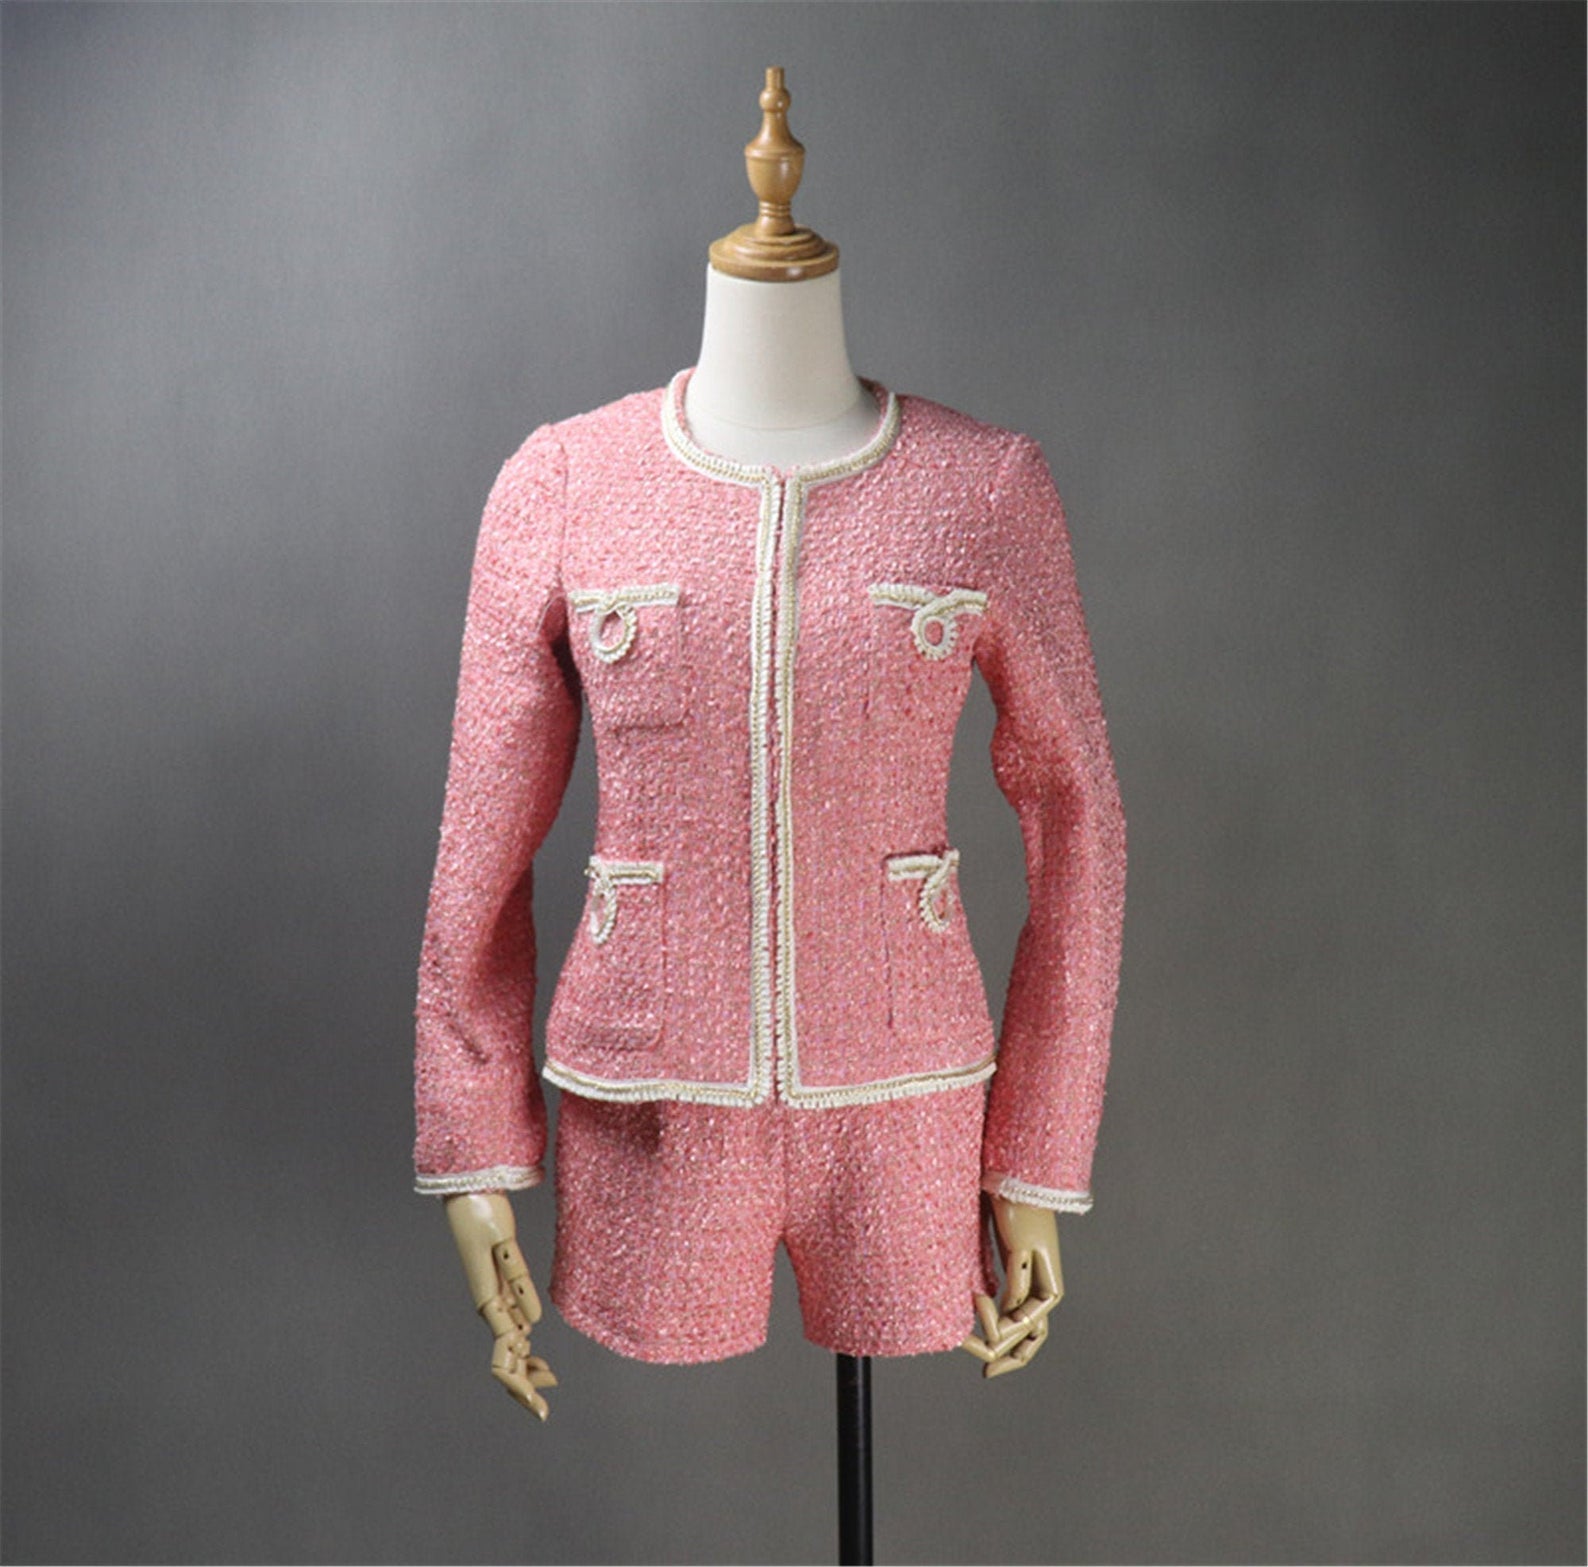 Custom Made Pink Tweed Blazer Coat+ Skirt / Shorts Suit for Women  UK CUSTOMER SERVICE!  Custom Made Pink Tweed Blazer Coat+ Skirt / Shorts Suit for Women, It is a must-have for any businesswoman to own a timeless, classic women's tweed suit.  All items are made to order. Please advise your height, weight and body measurements ( Bust, shoulder, Sleeves, Waist and Length etc). Our tailors will make the order for you!  Materials: Tweed